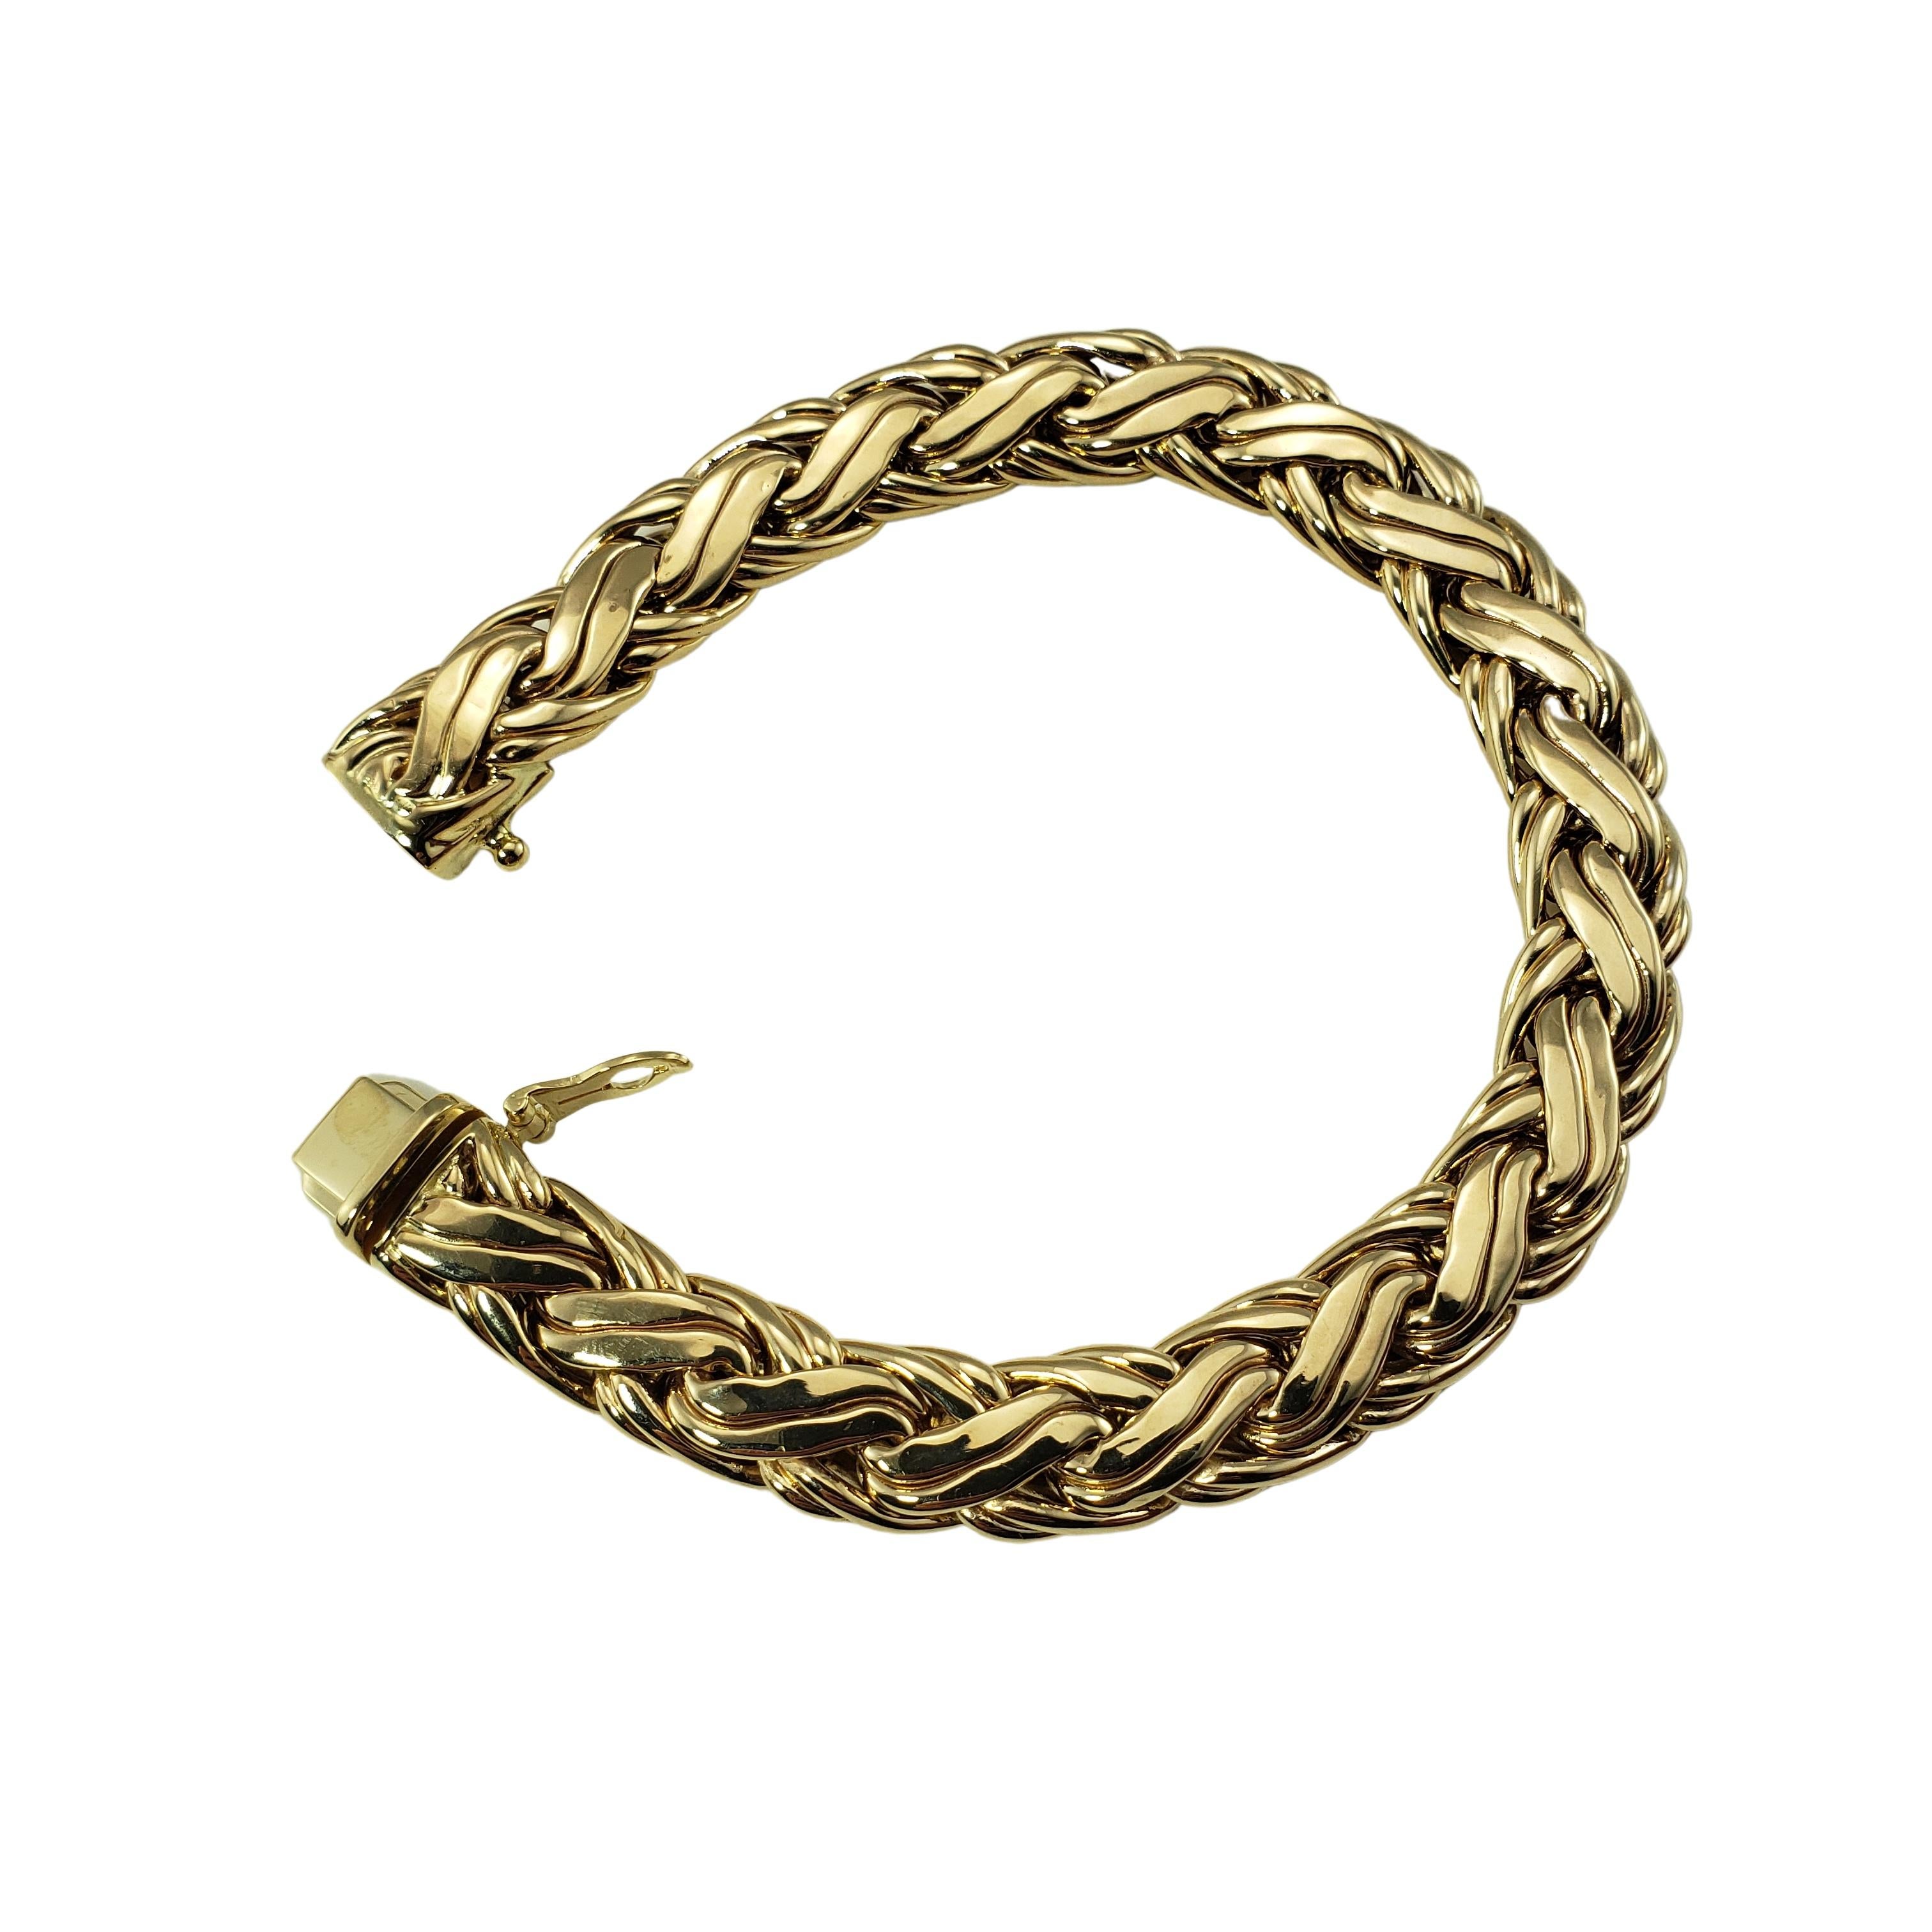 Tiffany & Co. Russian Weave 14 Karat Yellow Gold Bracelet-

This stunning Tiffany weave bracelet is crafted in beautifully detailed 14K yellow gold.  Width:  9 mm.

Size: 6.75 inches

Weight:  16.9 dwt. /  26.4 gr.

Hallmark:  TIFFANY & CO 